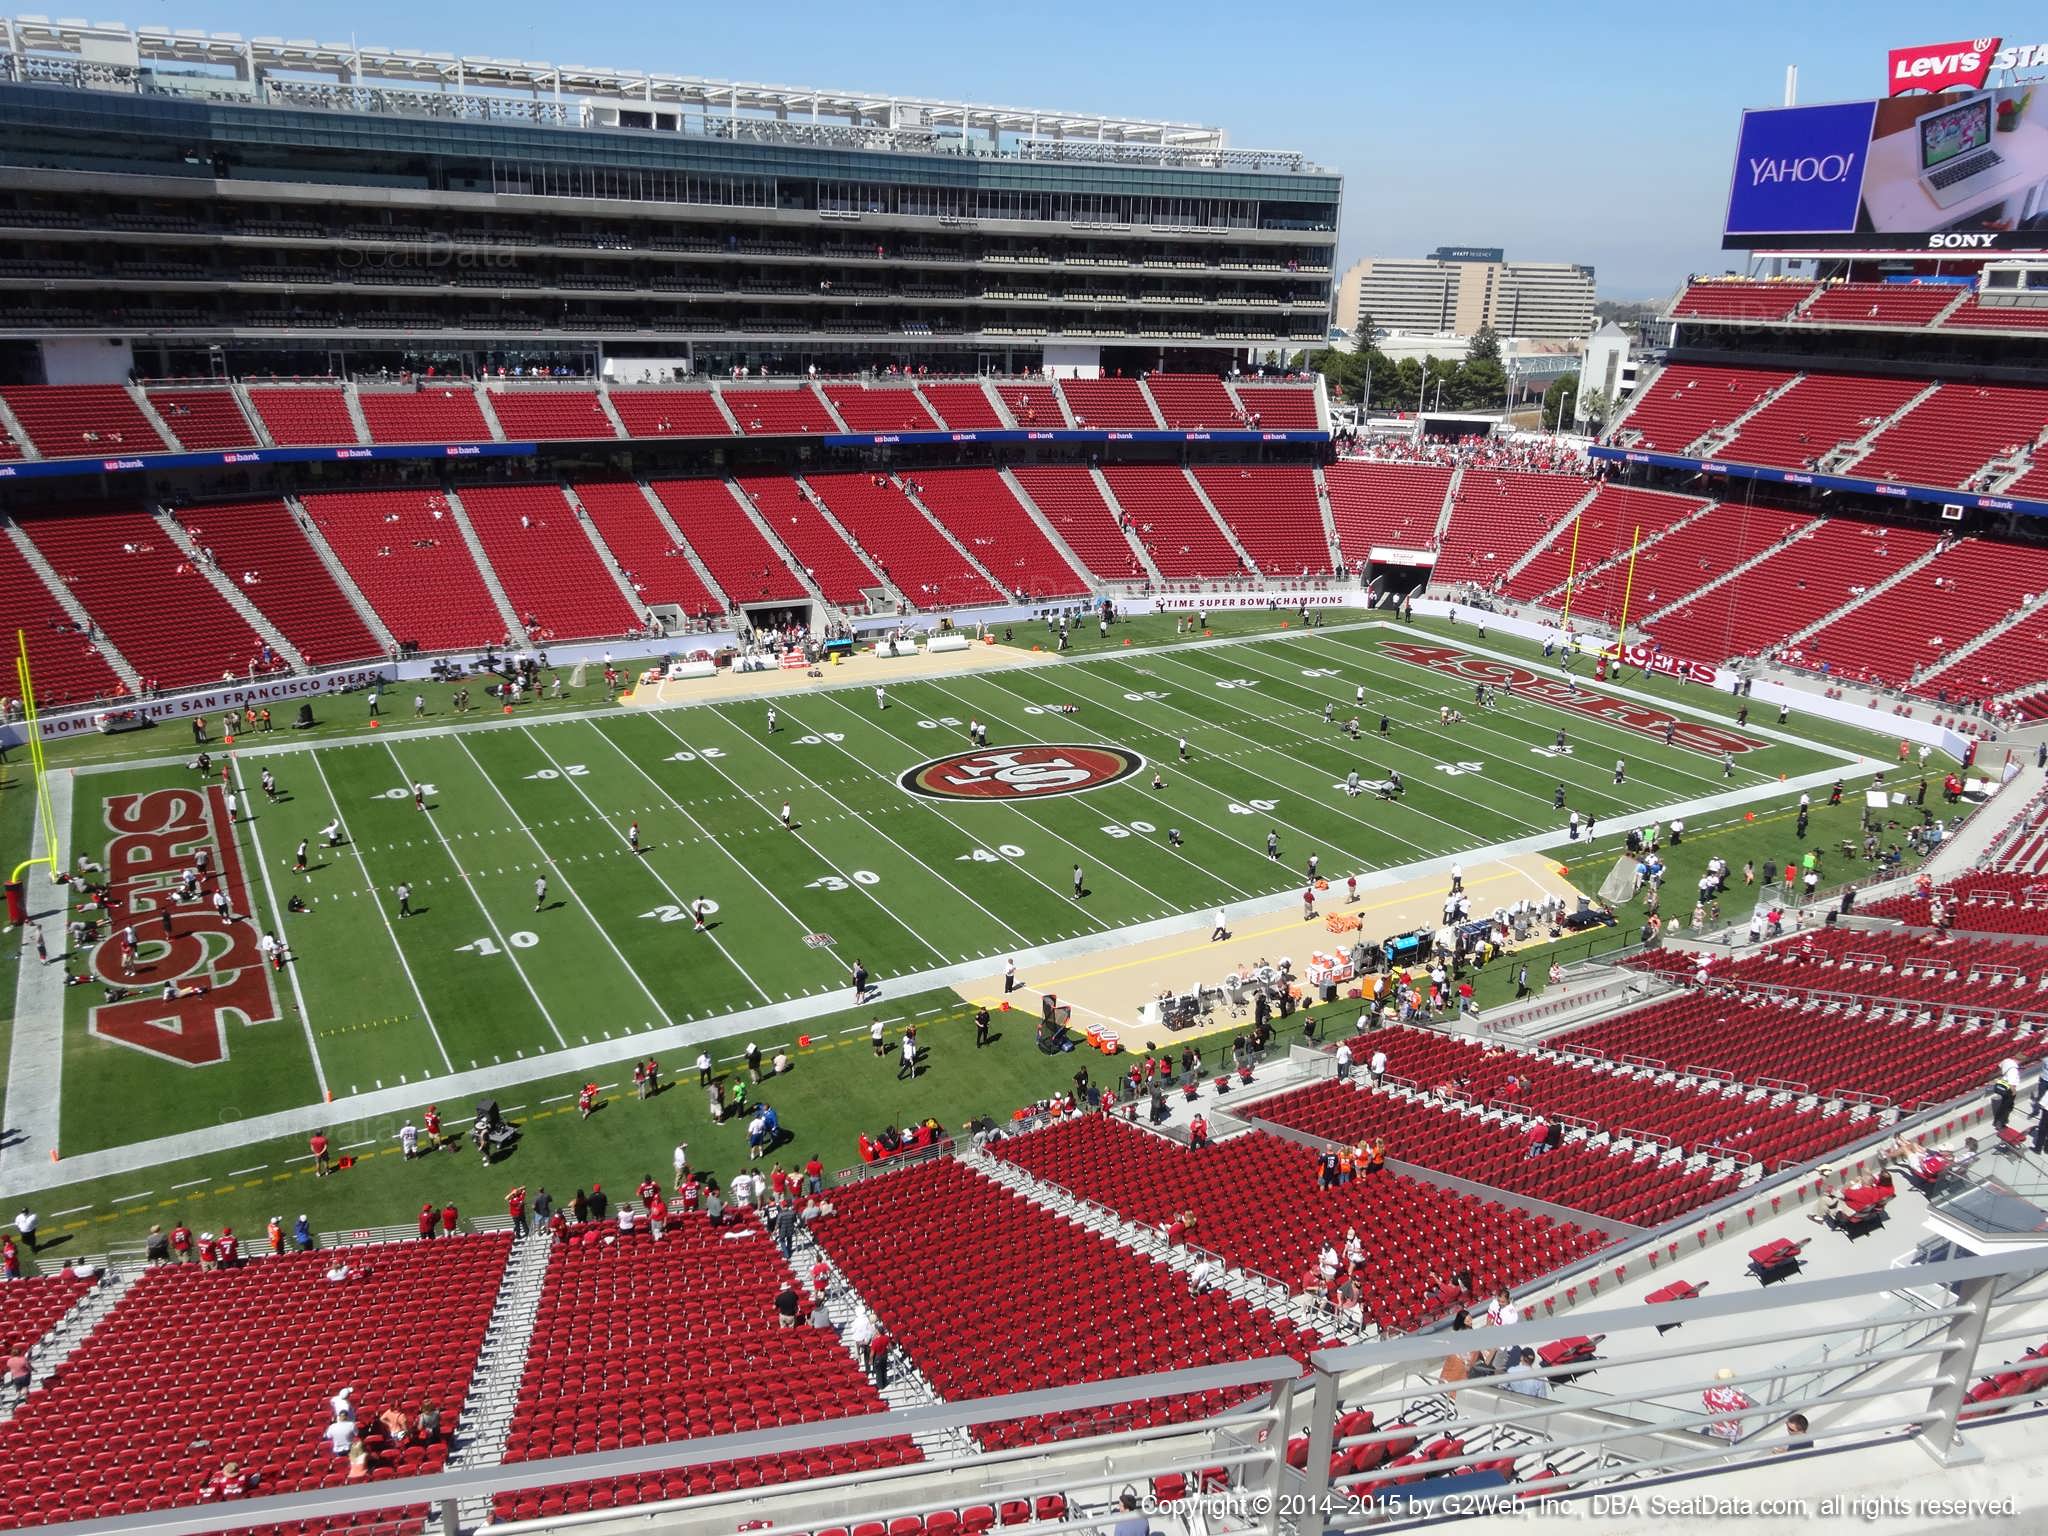 Seat view from section 318 at Levi’s Stadium, home of the San Francisco 49ers